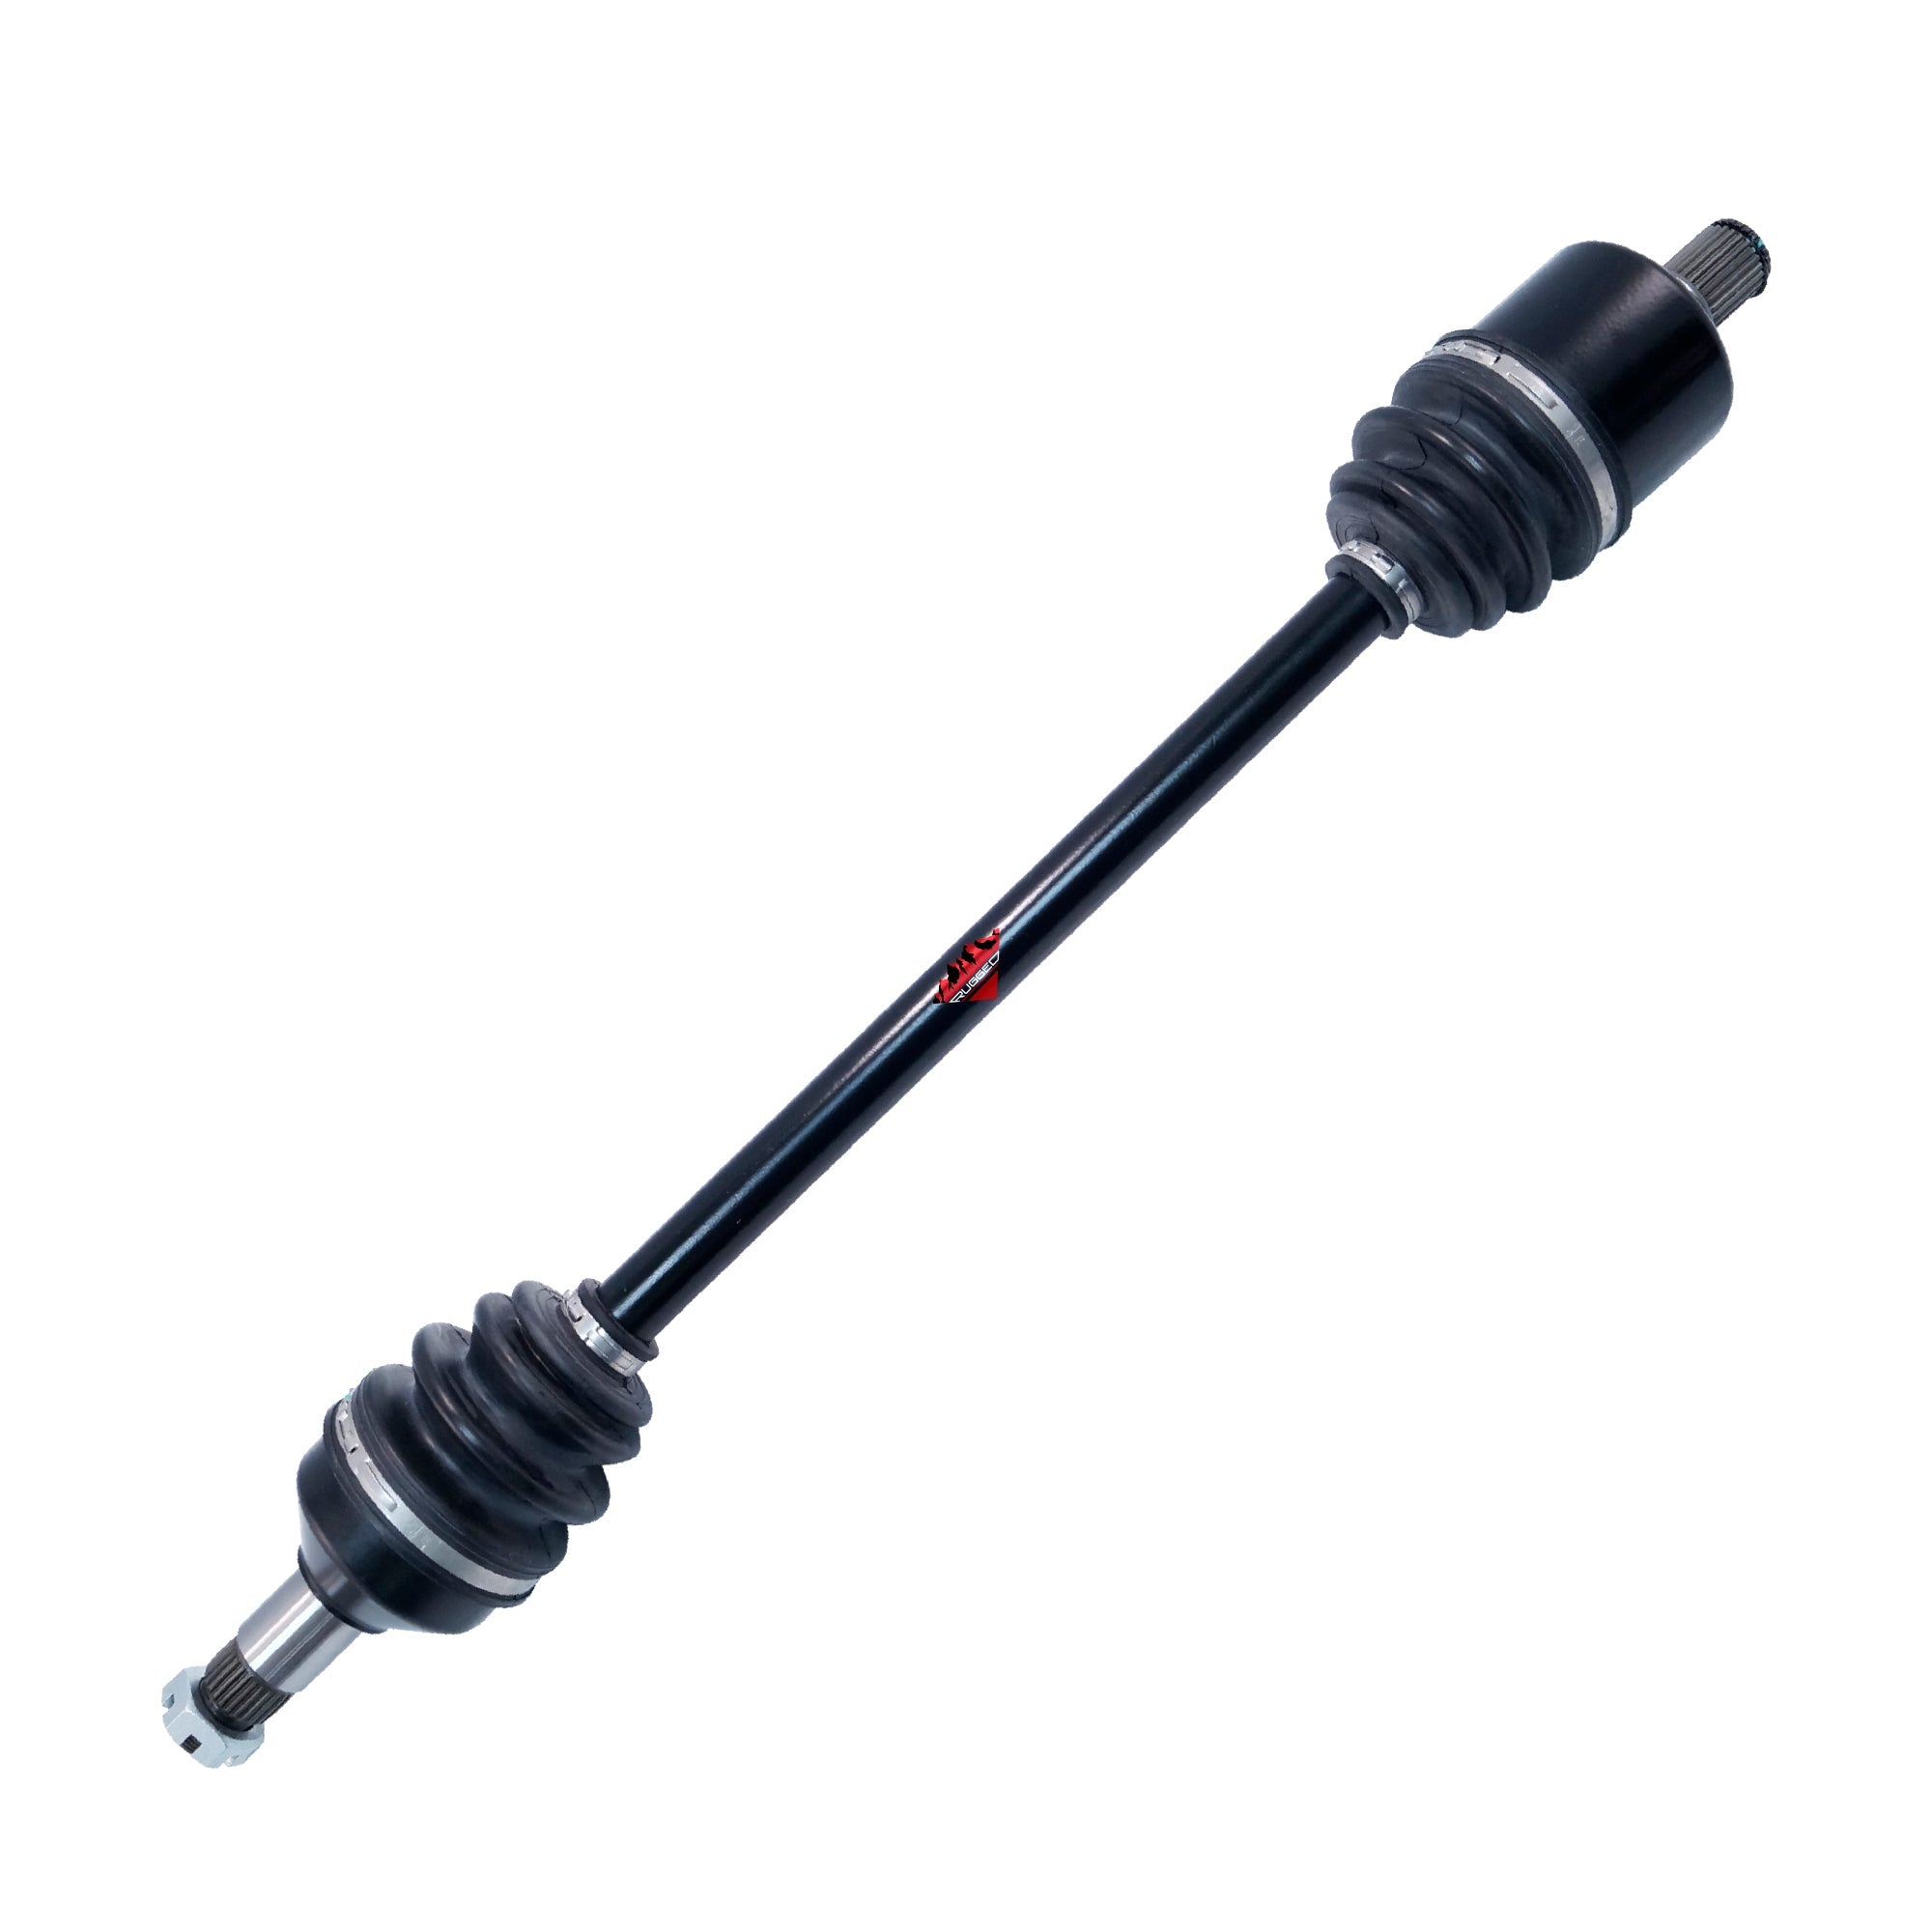 Performance Axle for Segway Snarler 570 